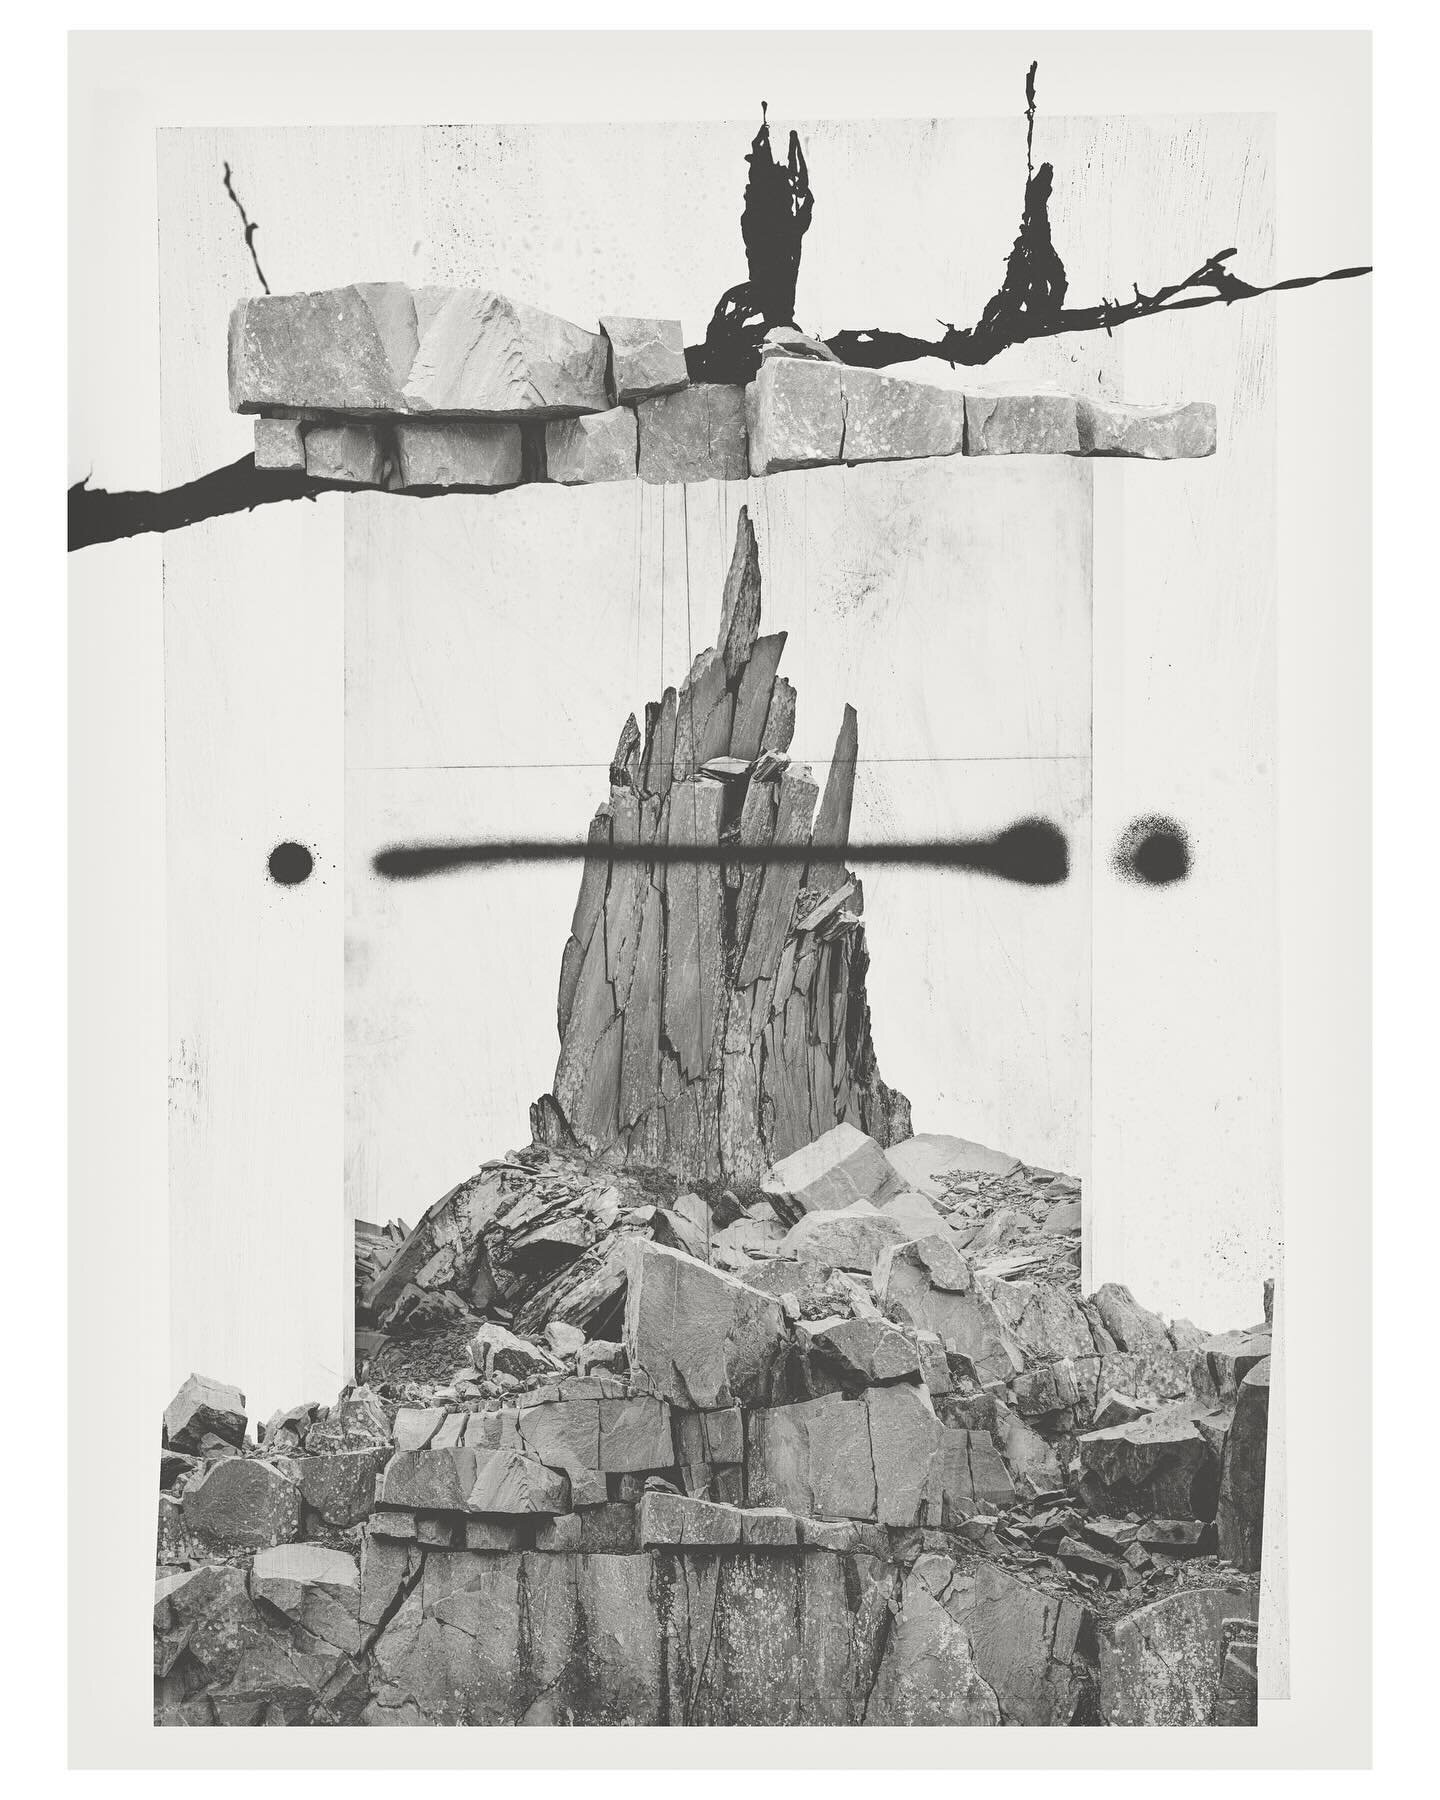 The Shattered pillar. Textures and shapes from a North Welsh slate quarry. Collage transferred to a negative and printed on @ilfordphoto silver gelatin paper.
I have always enjoyed constructing images that go beyond the real and become a fantasy, but